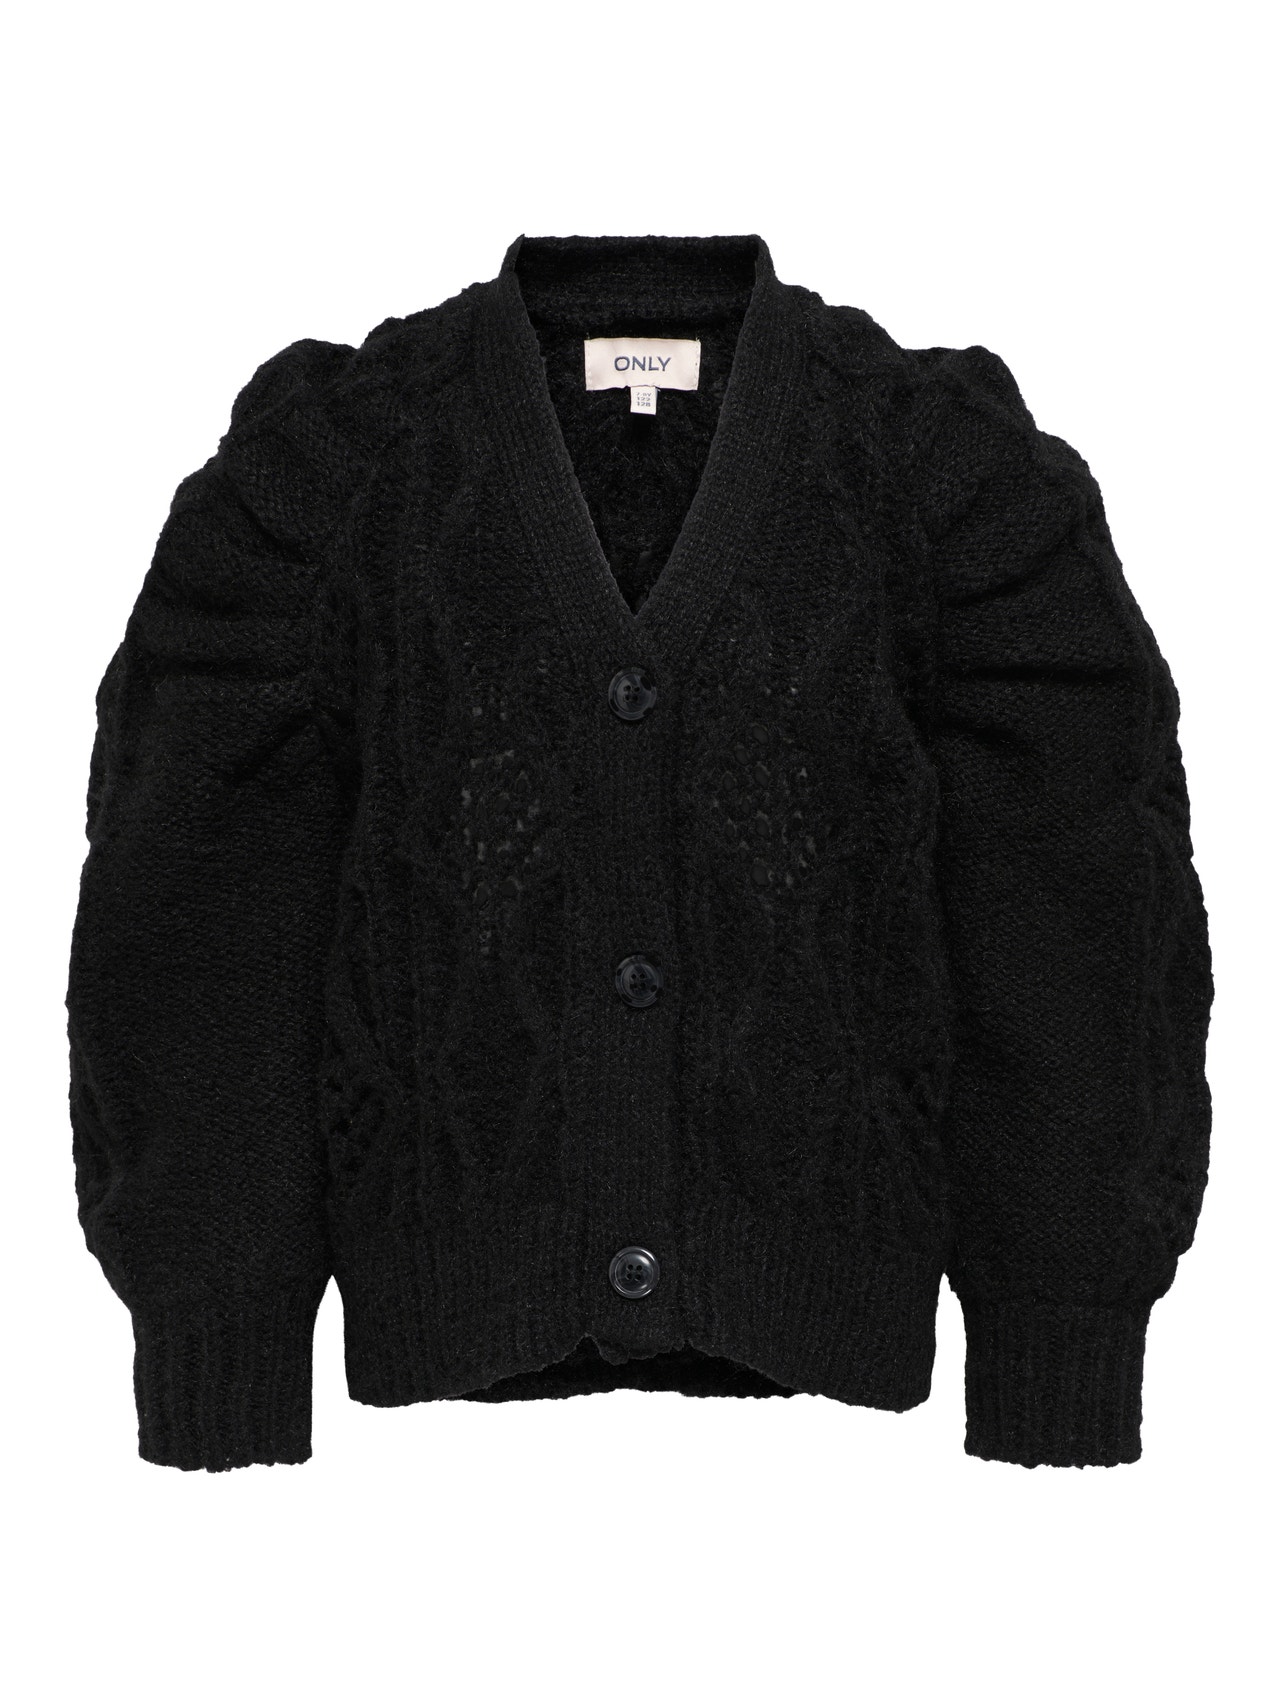 ONLY Regular Fit V-Neck High cuffs Balloon sleeves Knit Cardigan -Black - 15284531